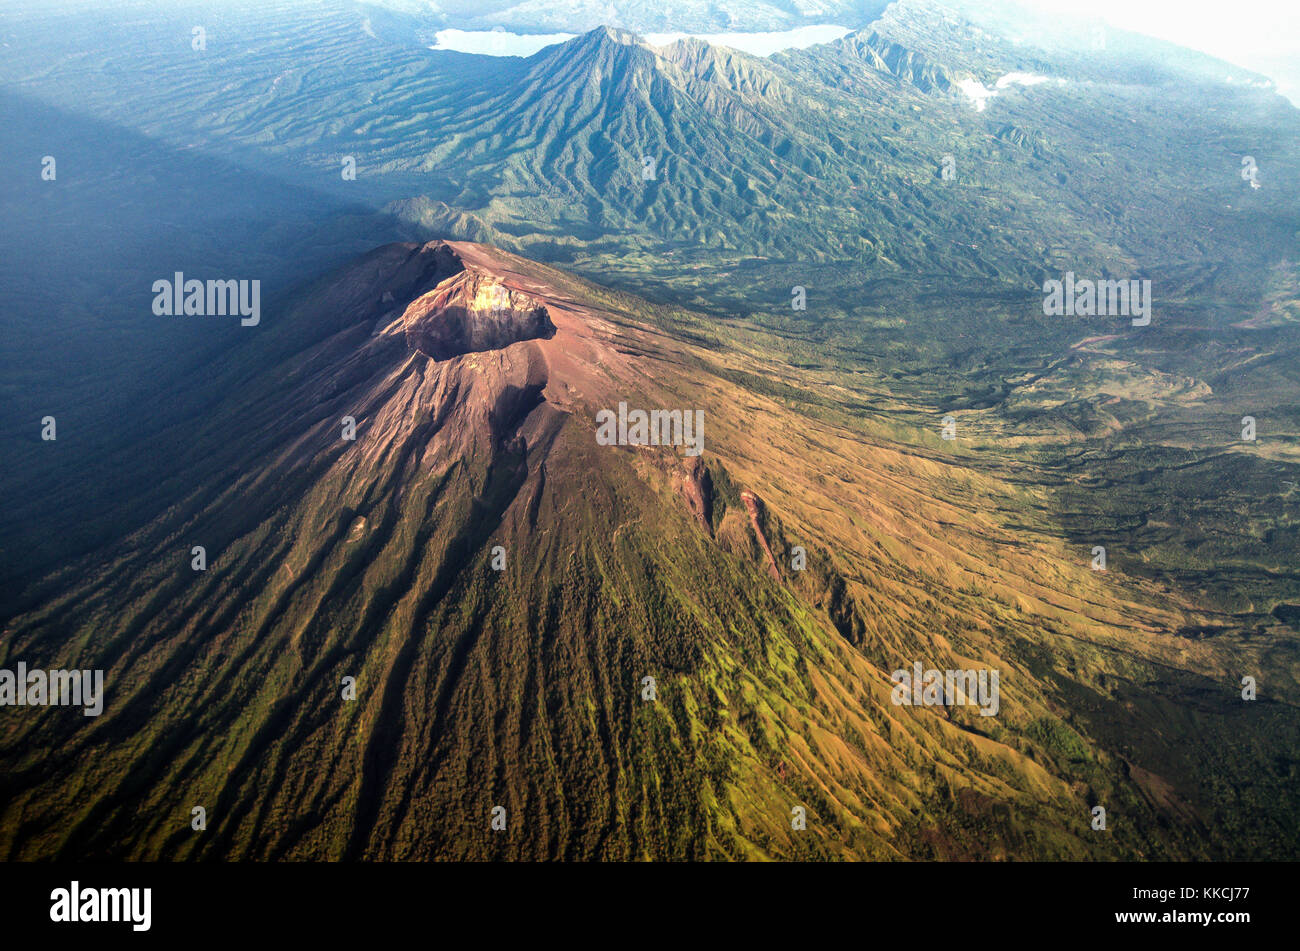 Mount Agung and its shadow from sunrise with mount Abang and mount Batur in the background. Stock Photo